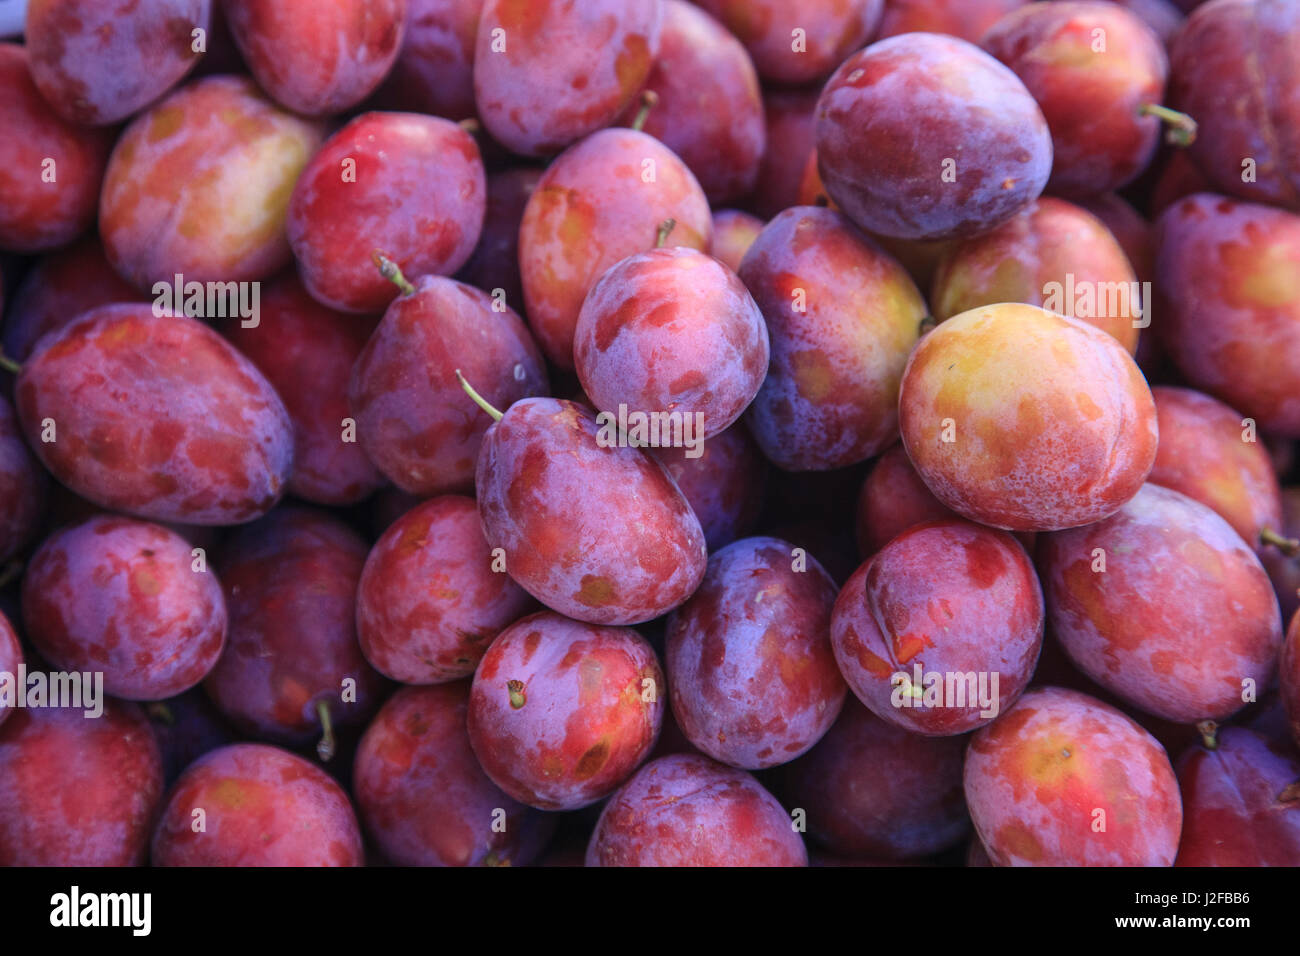 Display of red plums in the Caldas da Rainha open air market in Portugal. Stock Photo